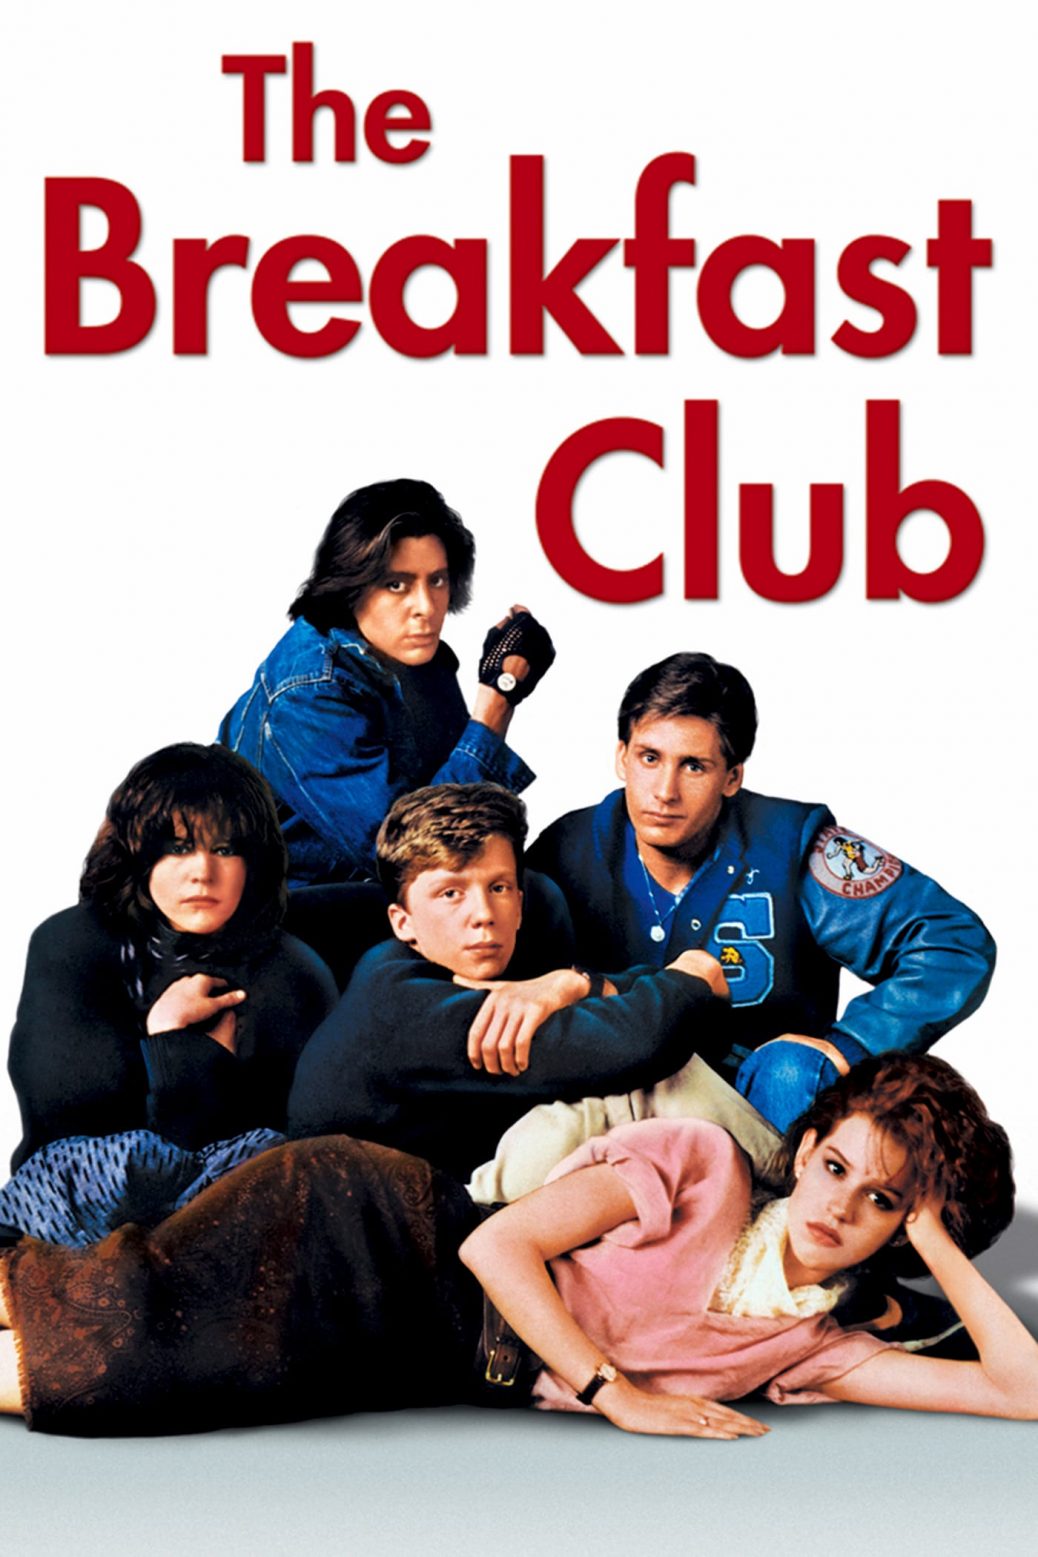 Poster for the movie "The Breakfast Club"